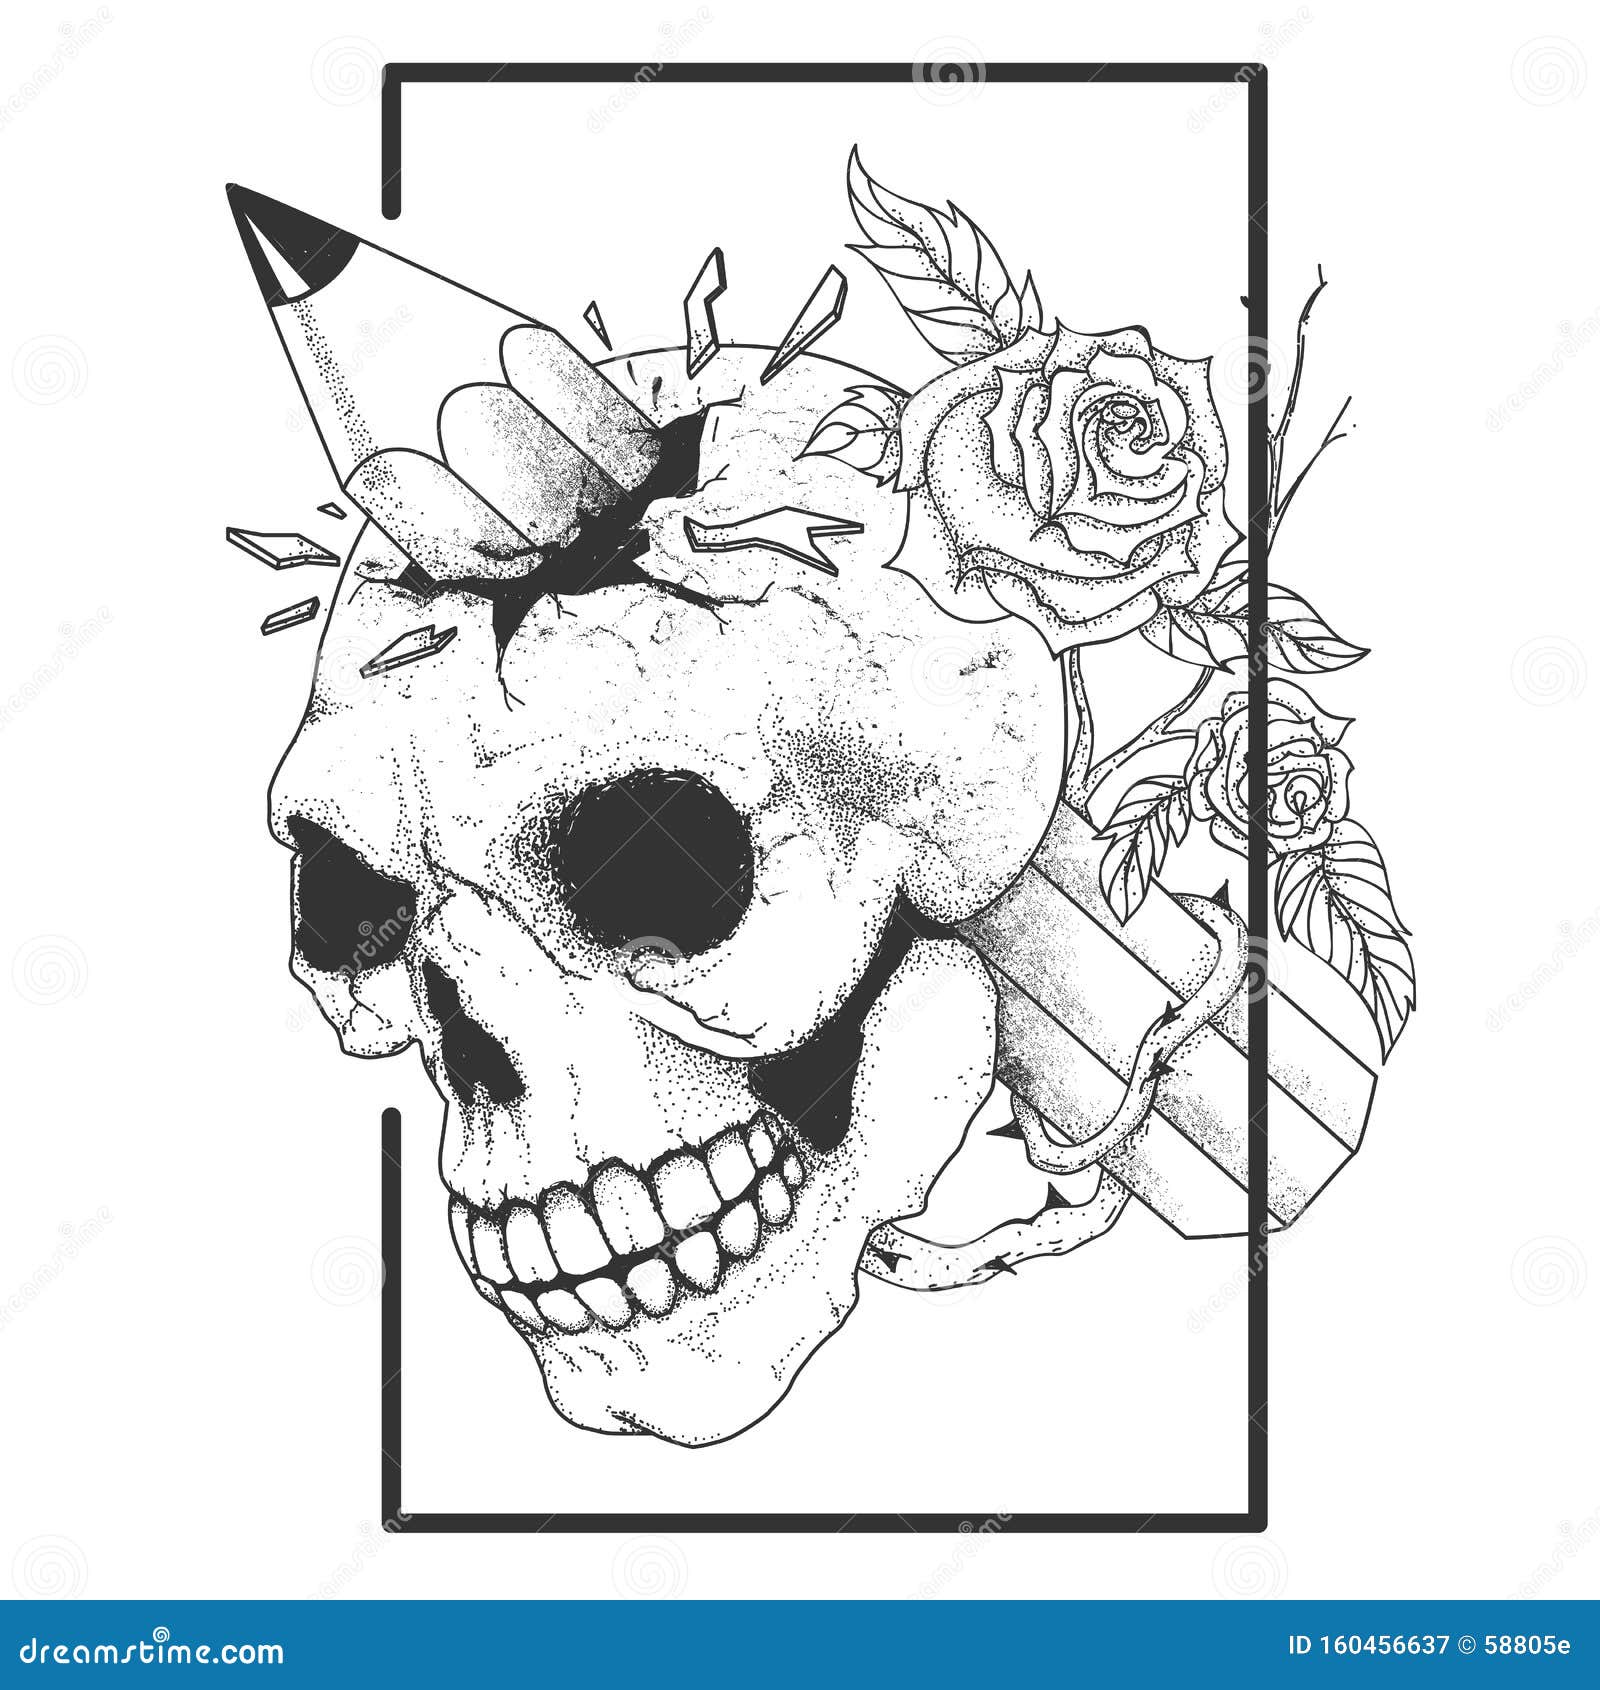 Learn 107+ about skull tattoo drawing super cool .vn